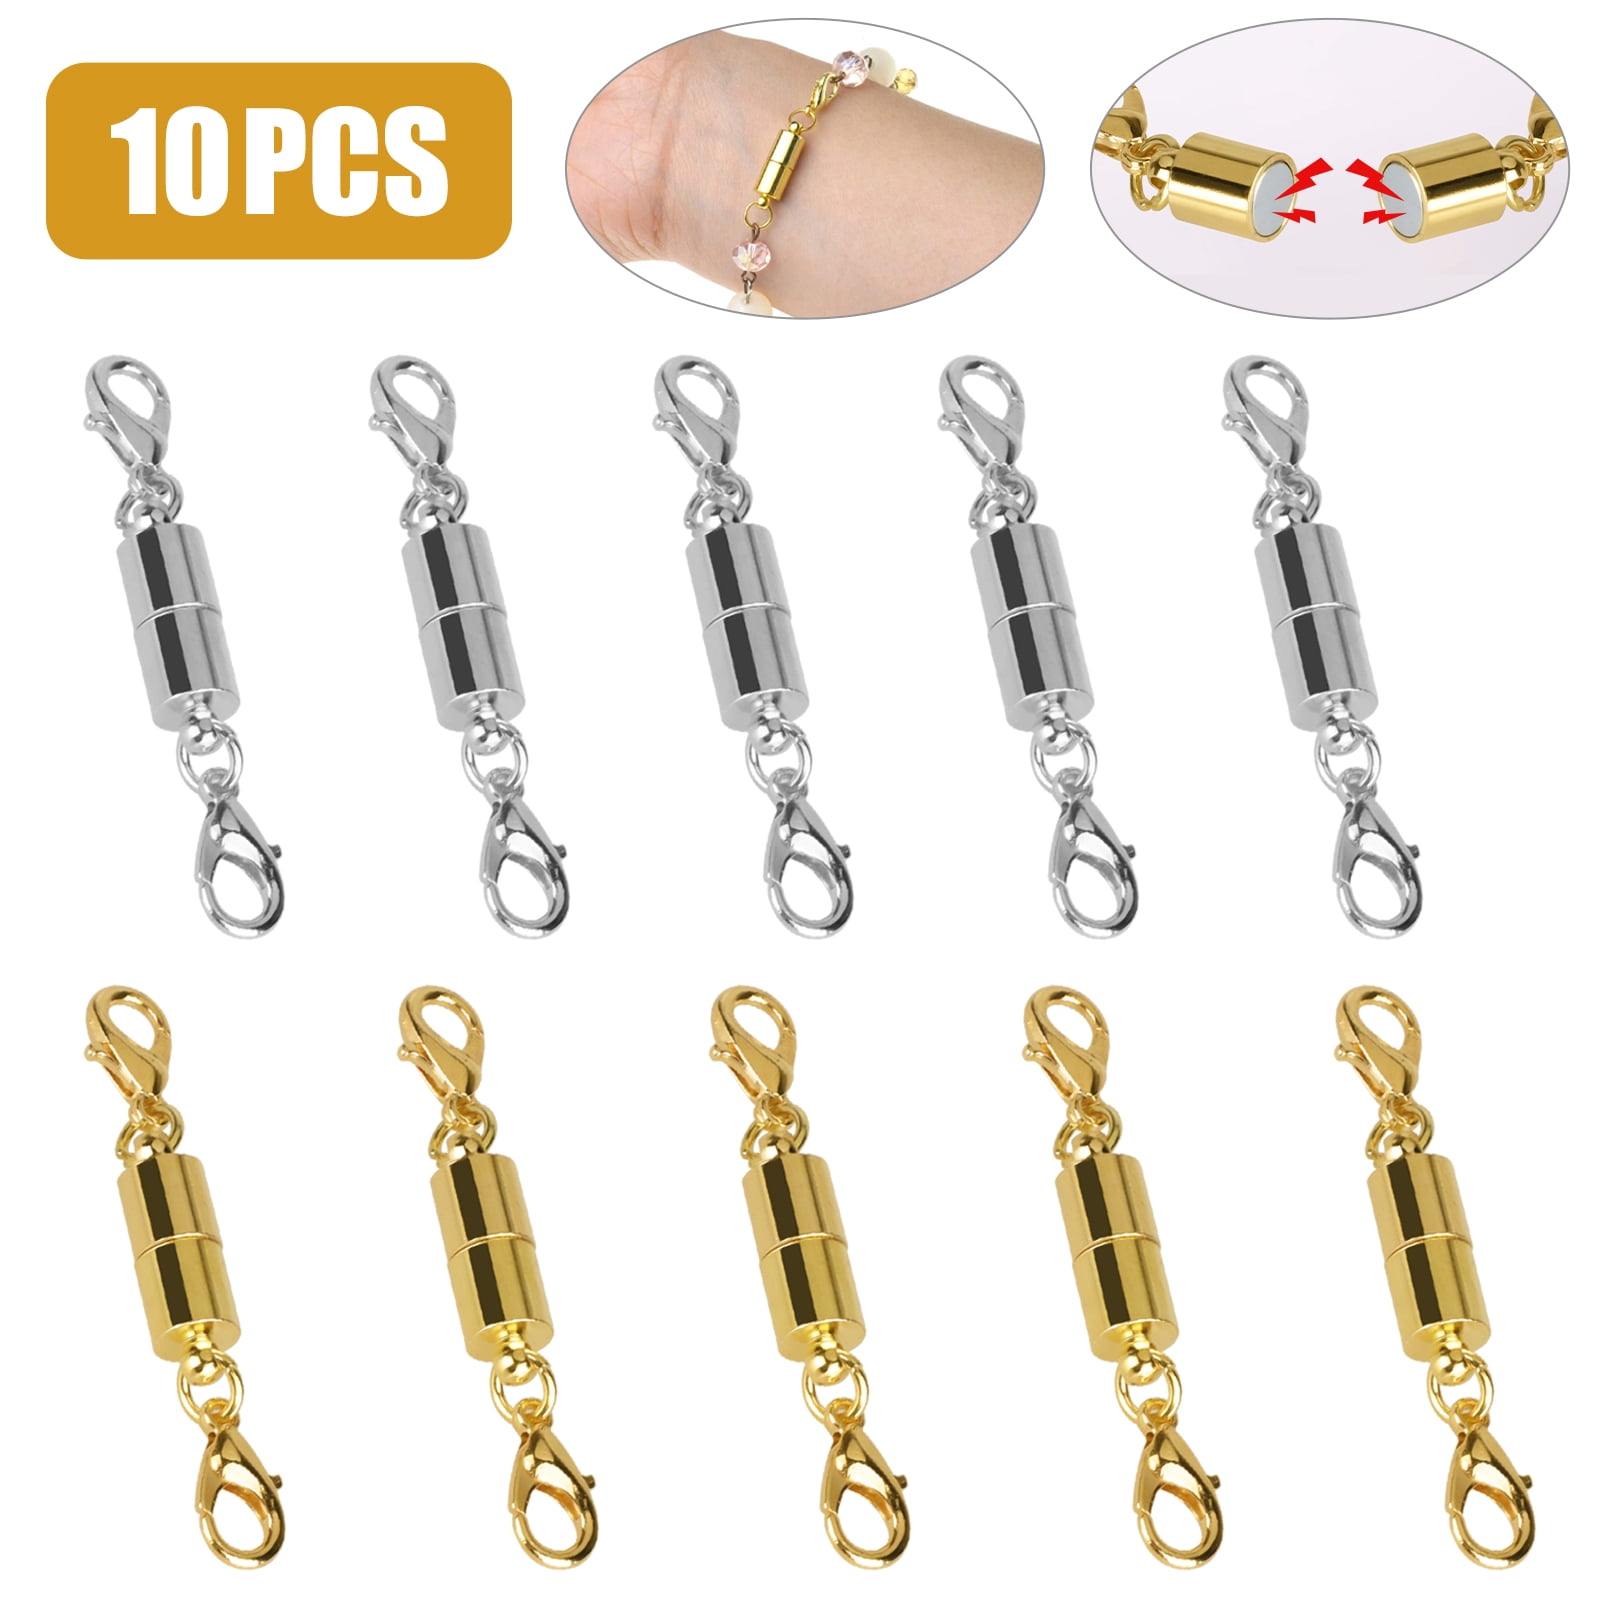 5PCs/6Pcs Accessories Silver Gold Extender DIY Connector Hook Necklace  Bracelet Connector Buckle Magnetic Clasps Jewelry Making Supplies